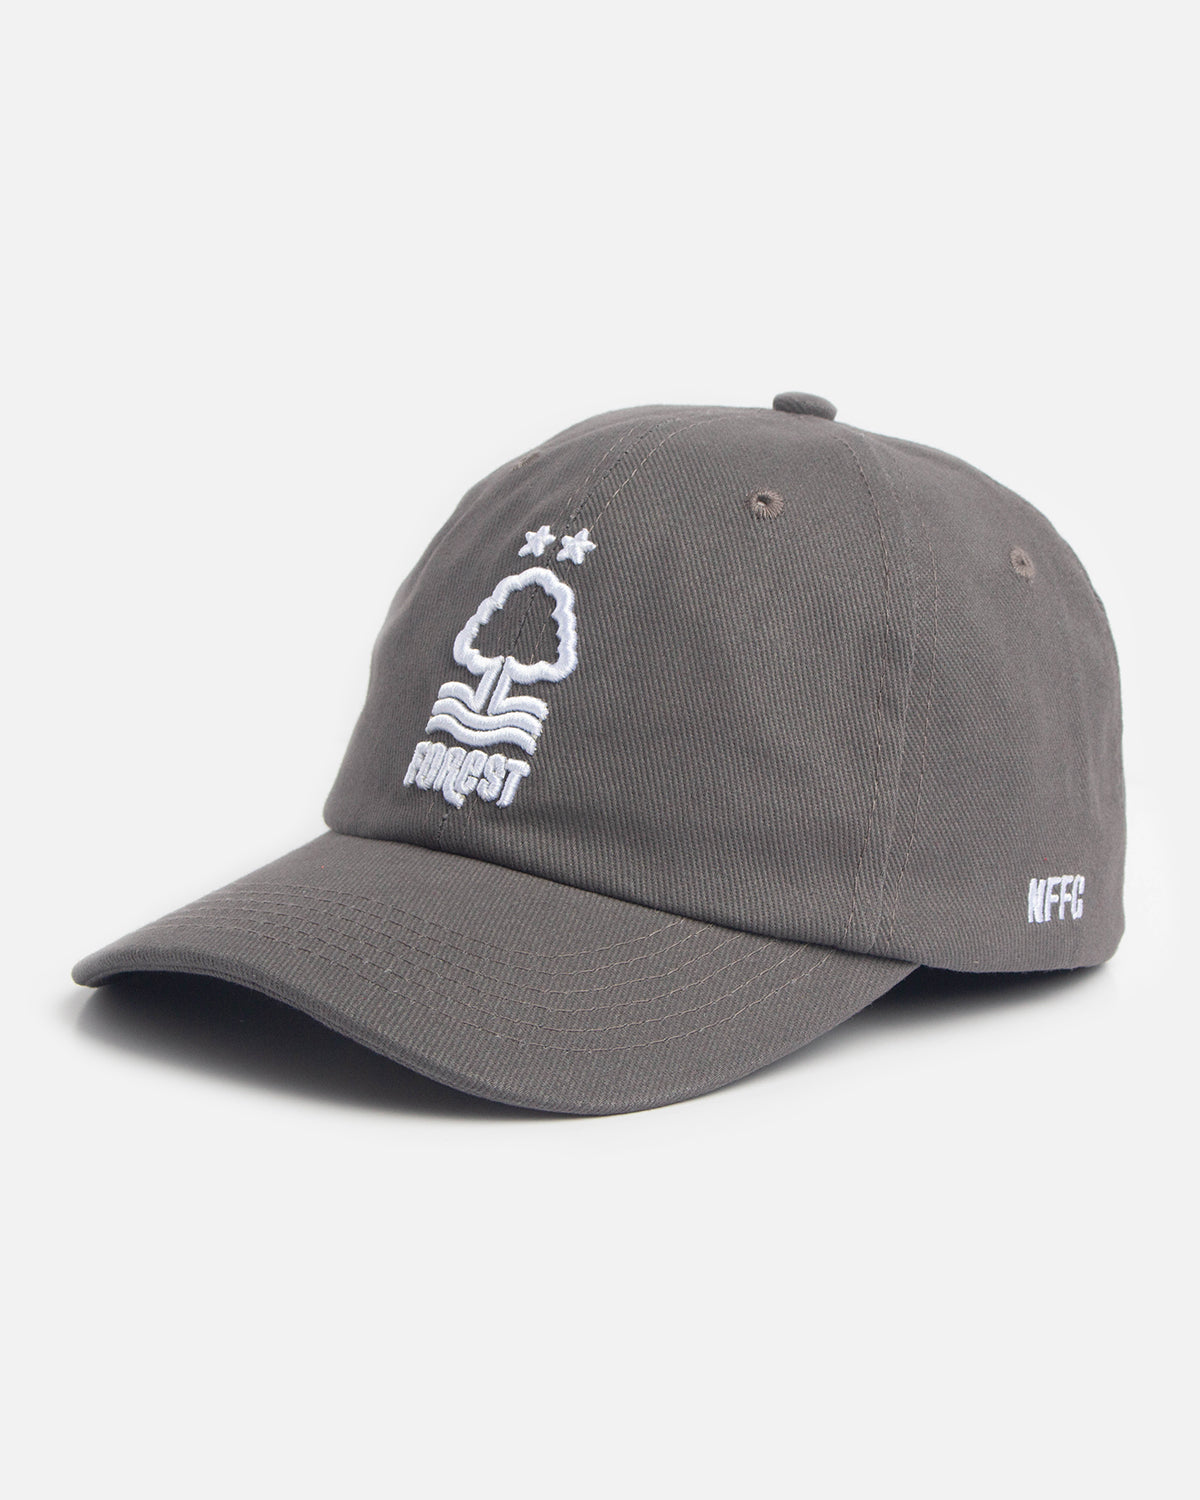 NFFC Charcoal Relaxed Fit Cap